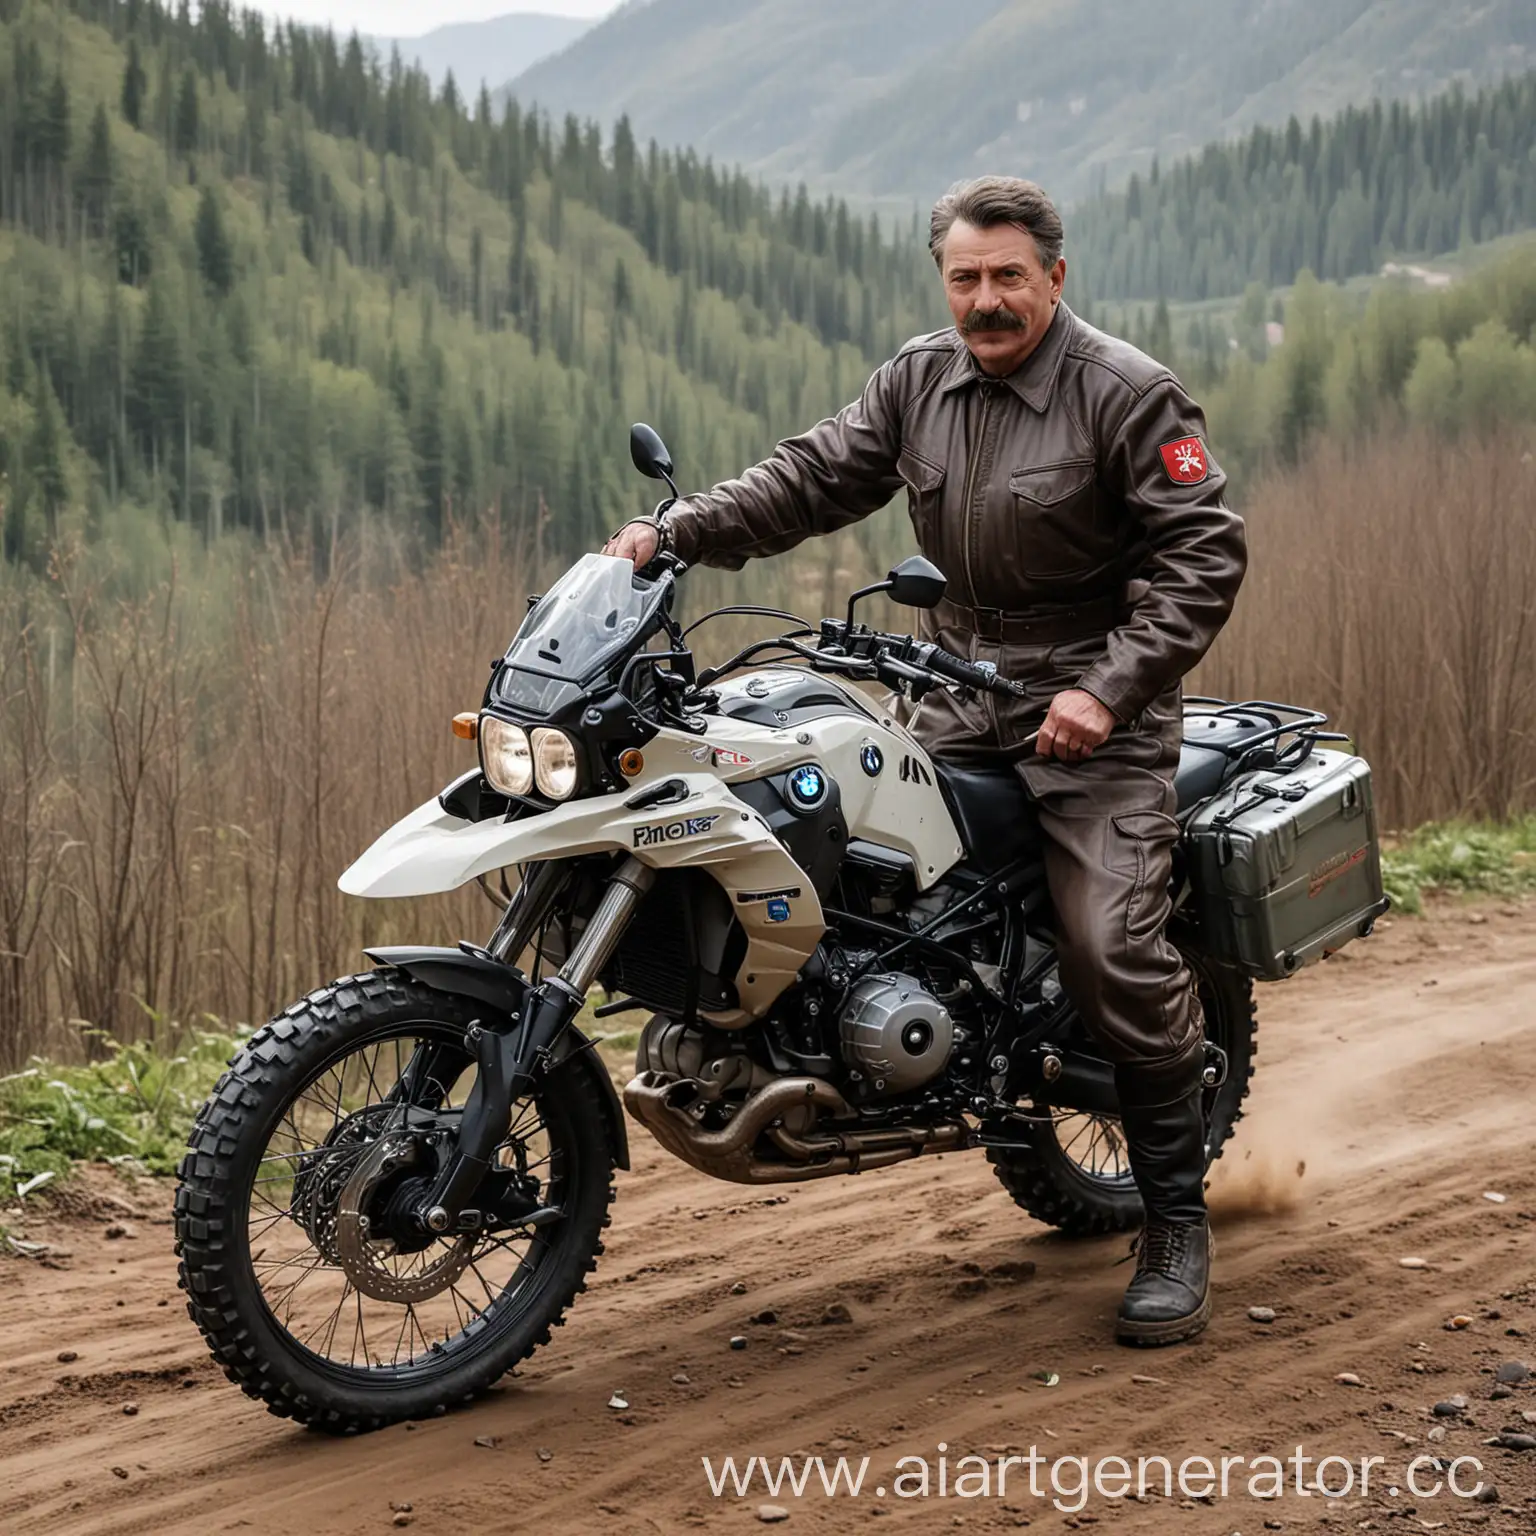 Stalin-Riding-BMW-F750GS-Motorcycle-with-Soviet-Flag